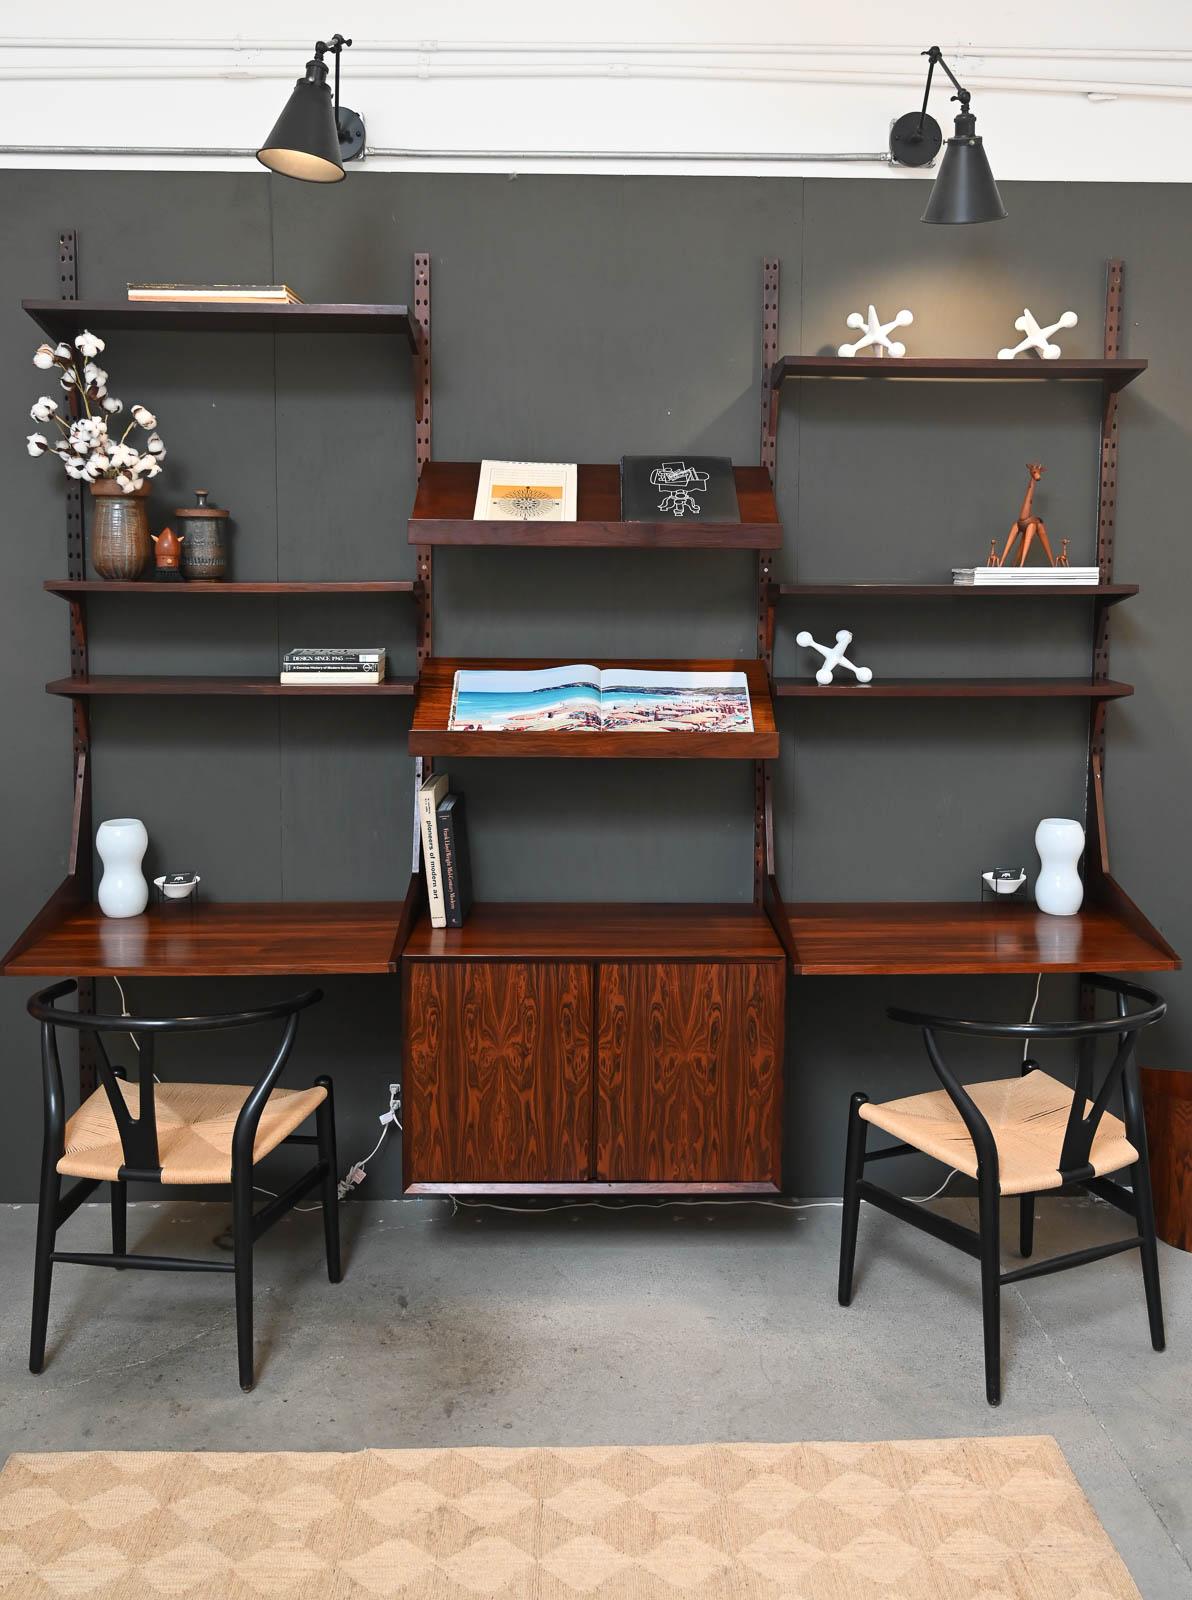 Exceptional Rosewood Wall Unit by Poul Cadovius, ca. 1965.  Incredibly stunning rosewood wall mounted shelving unit by Poul Cadovius, Denmark.  This is one of the finest and most beautiful pieces we have curated and included all shelving shown as